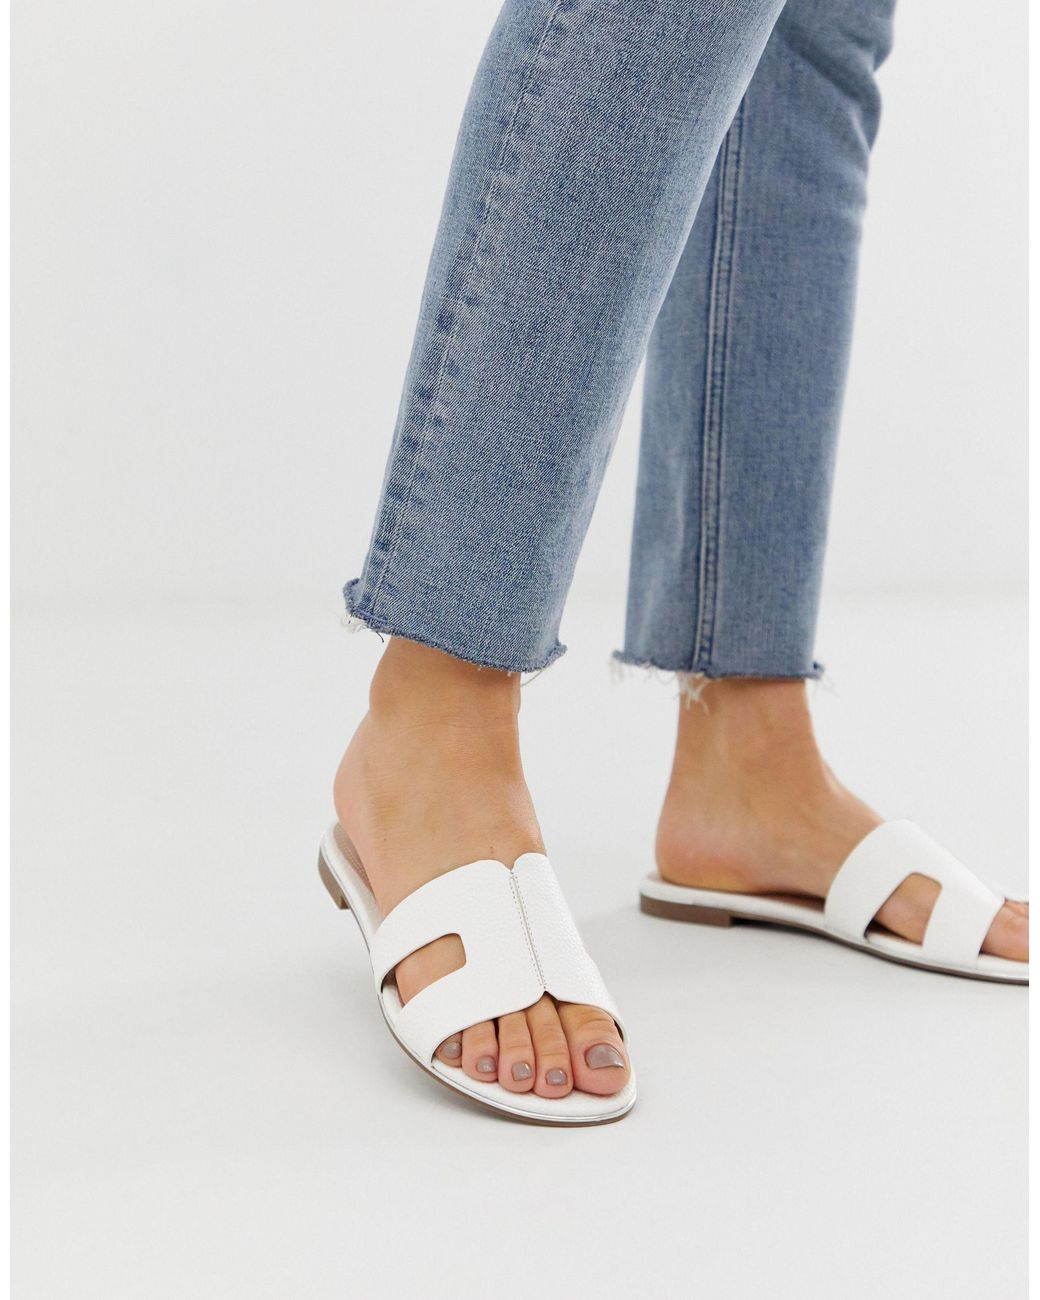 Dune Loopy Slip On Flat Sandals in White | Lyst UK